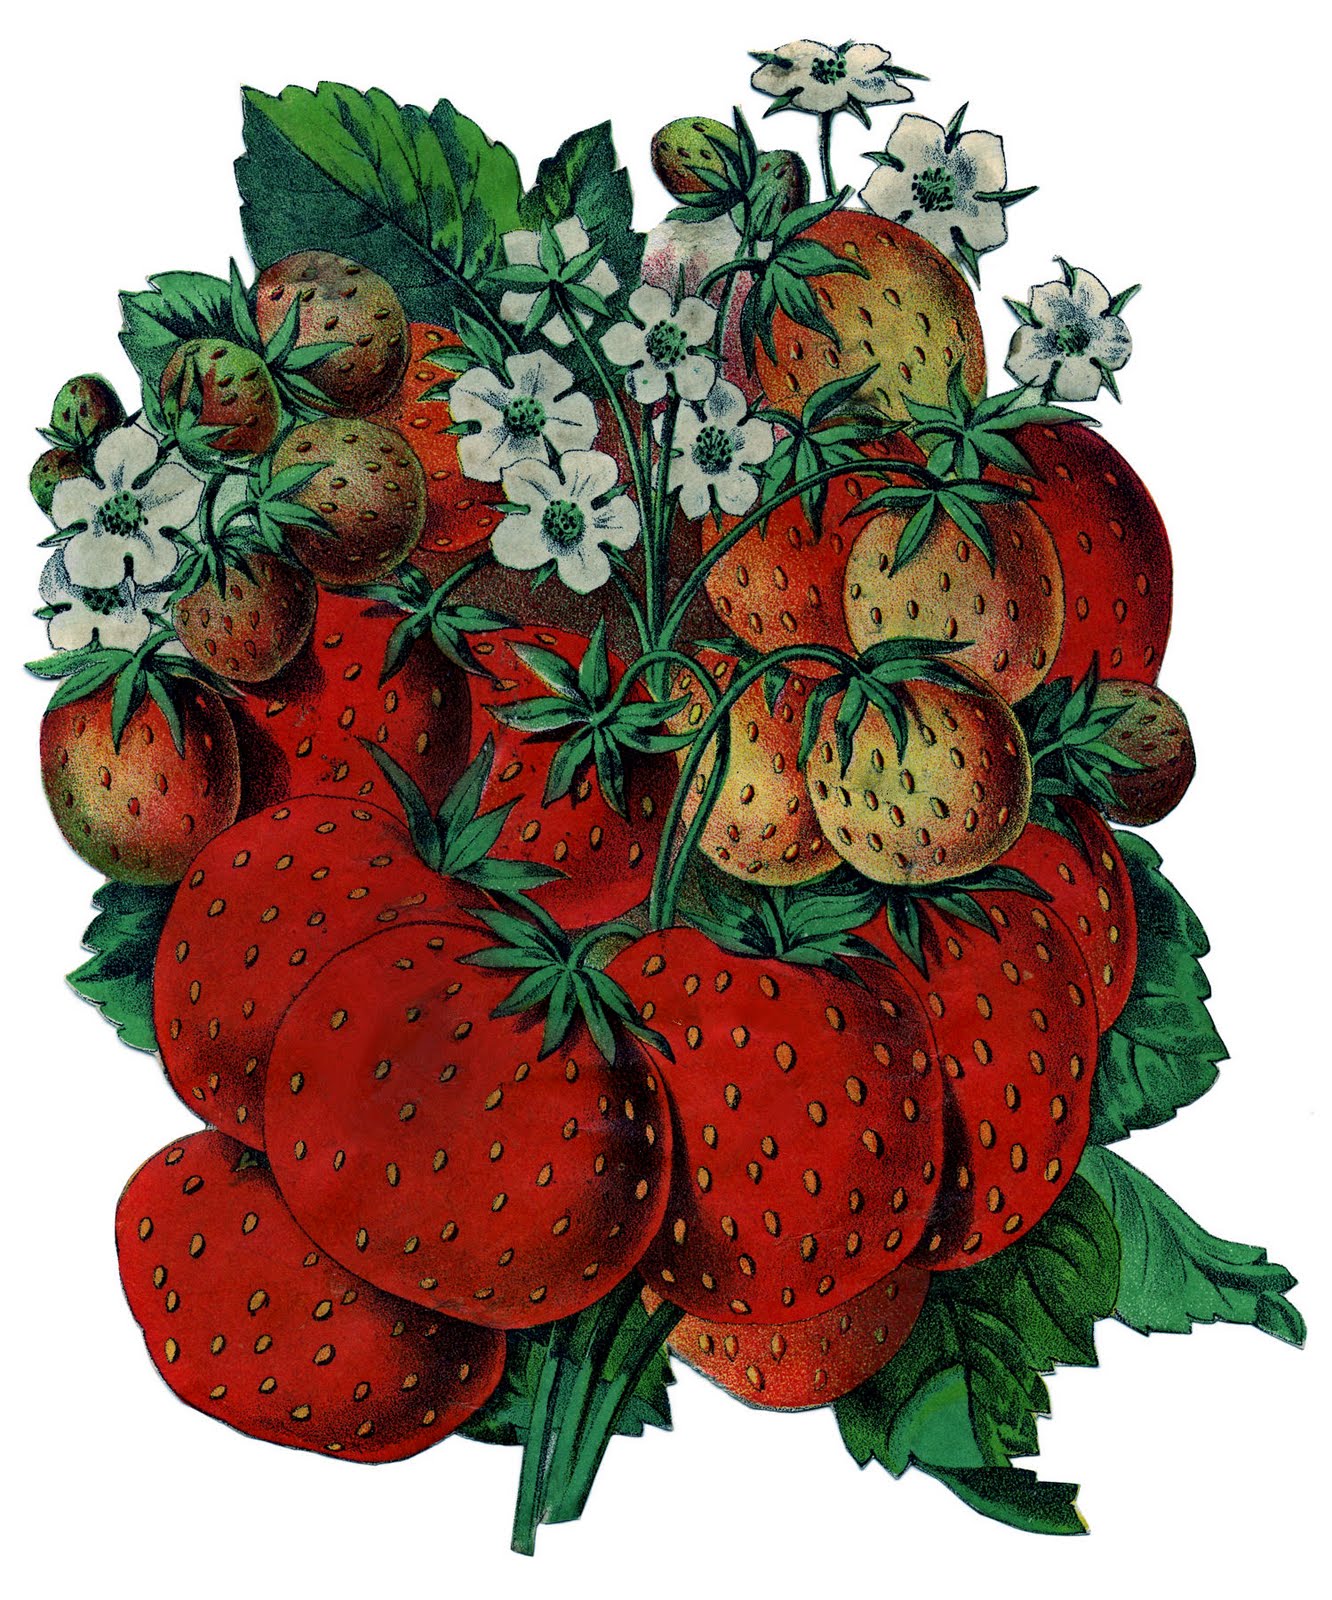 Old Seed Catalog Art - Strawberries - The Graphics Fairy1332 x 1600